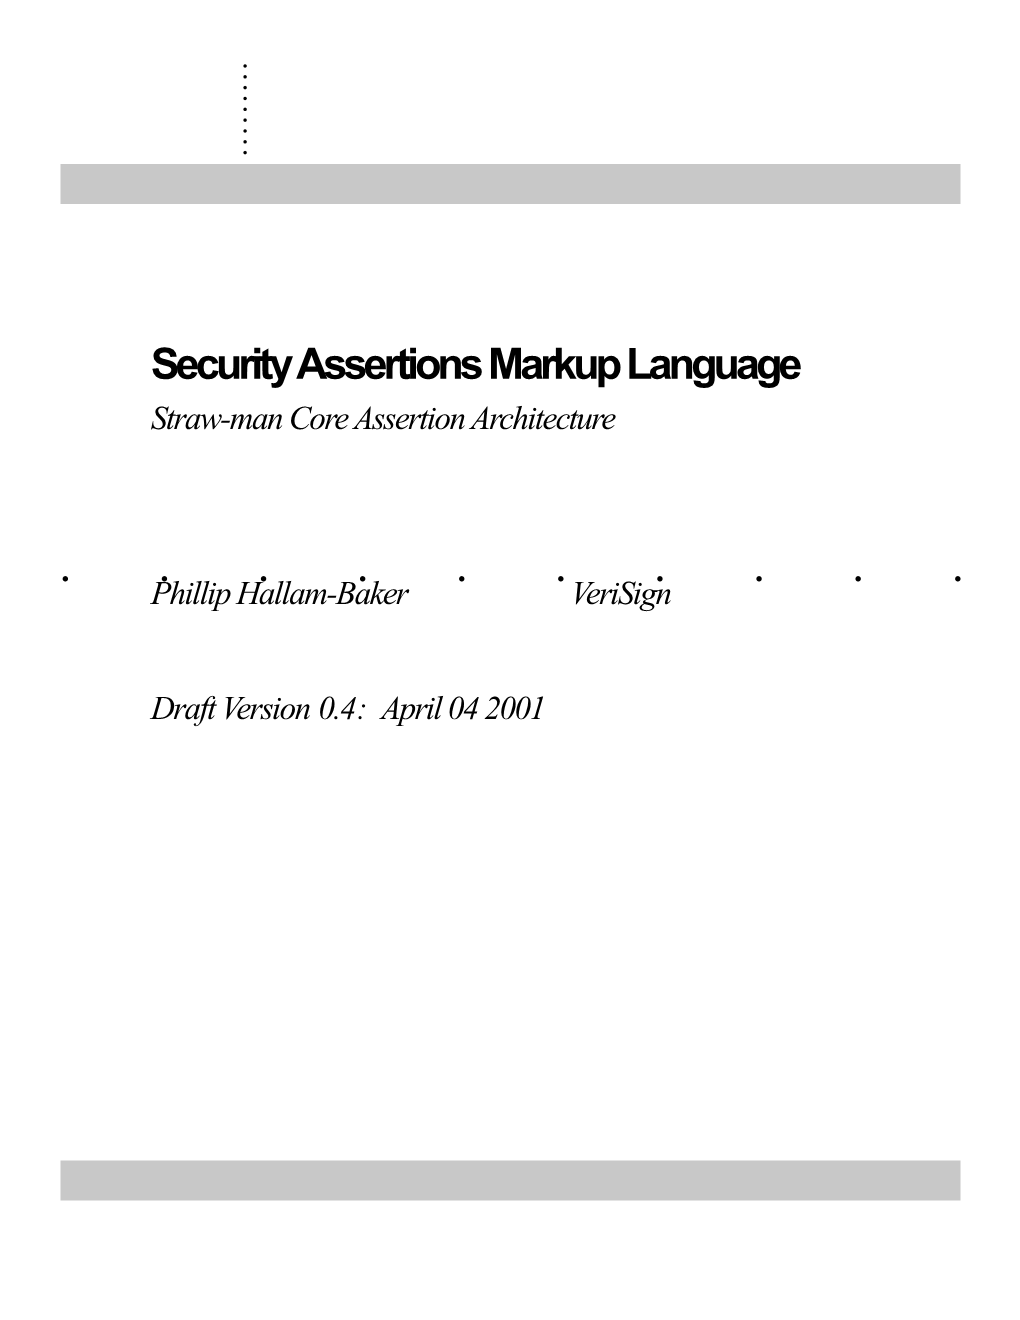 Security Assertions Markup Language s1